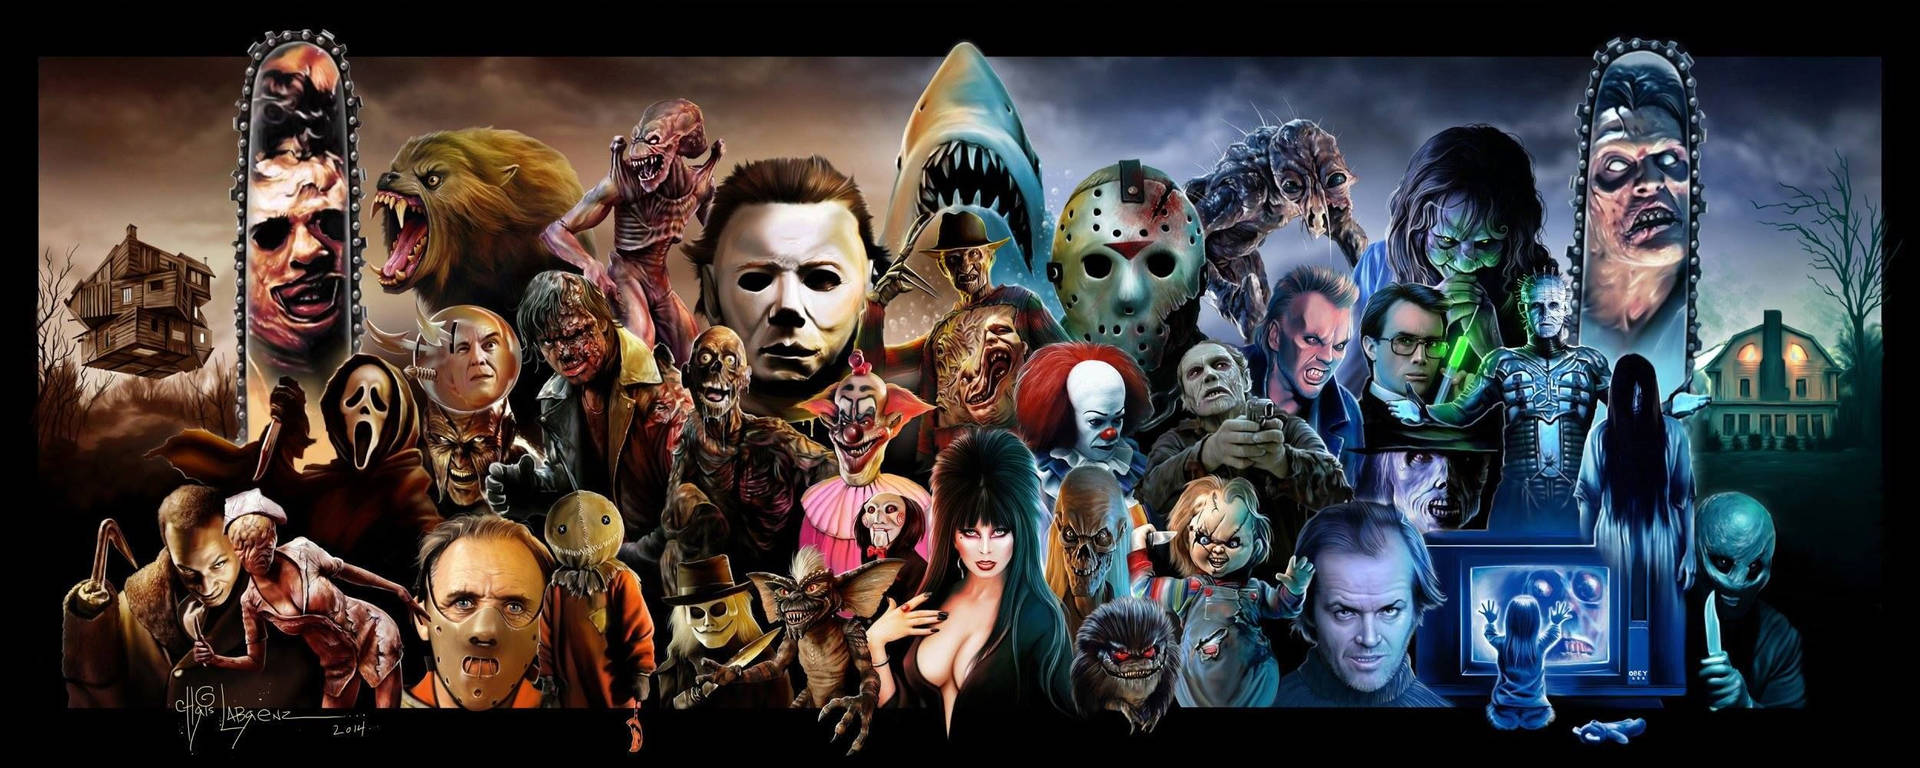 "Explore the world of classic horror movies" Wallpaper